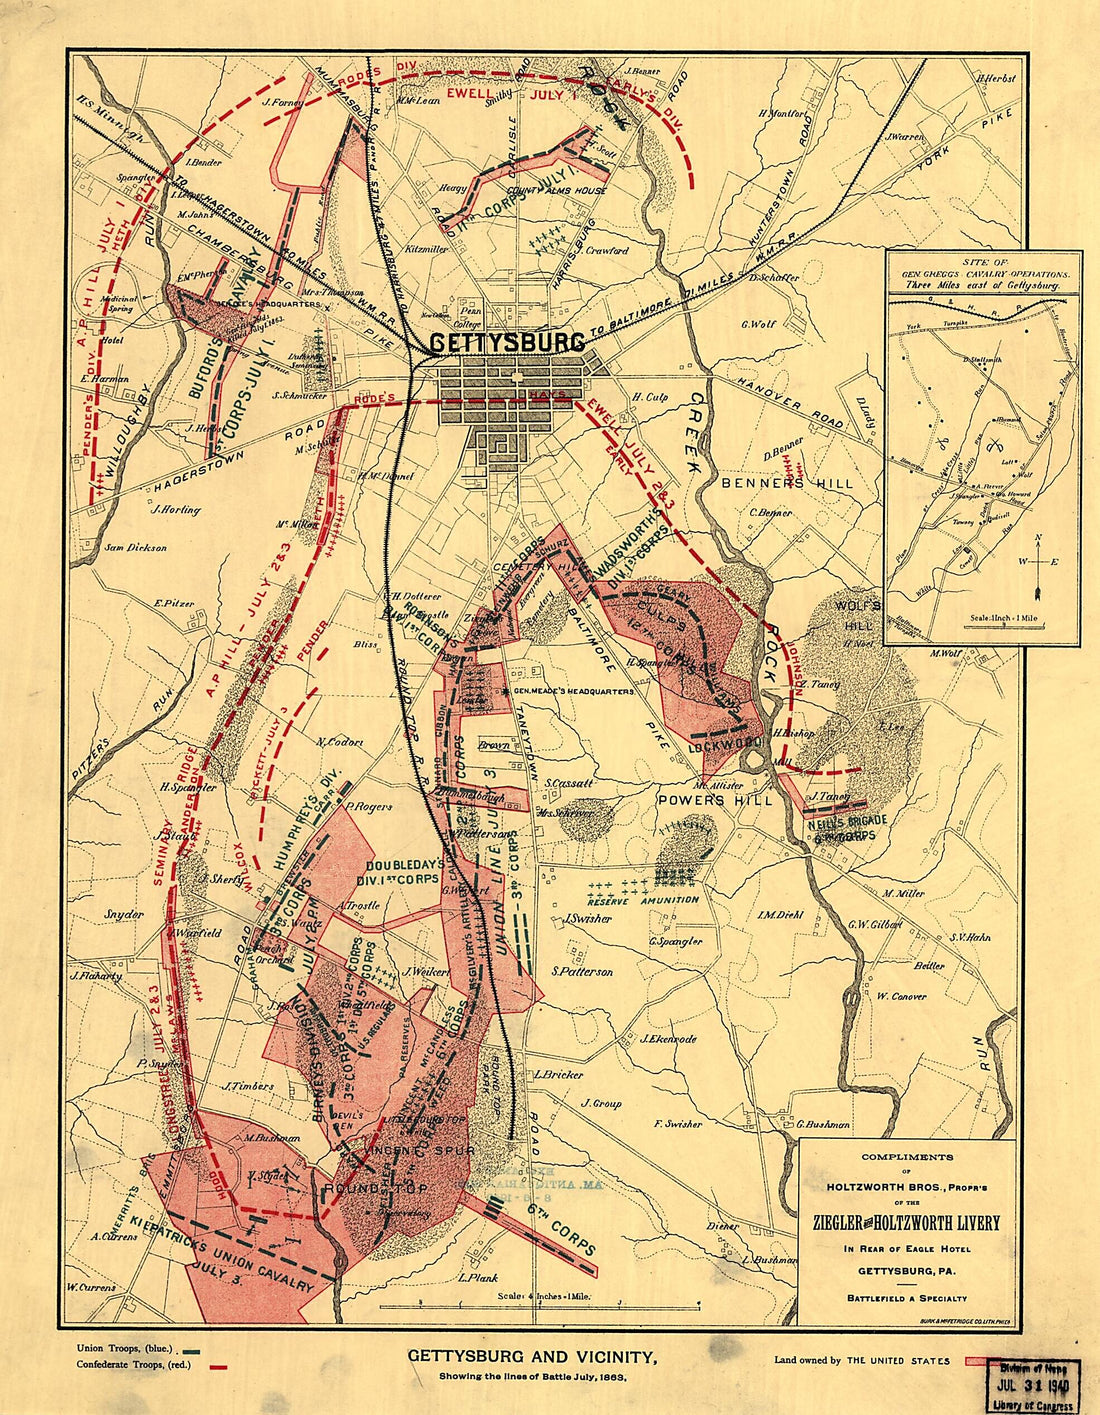 This old map of Gettysburg and Vicinity, Showing the Lines of Battle, July, from 1863 was created by  Burk &amp; McFetridge in 1863